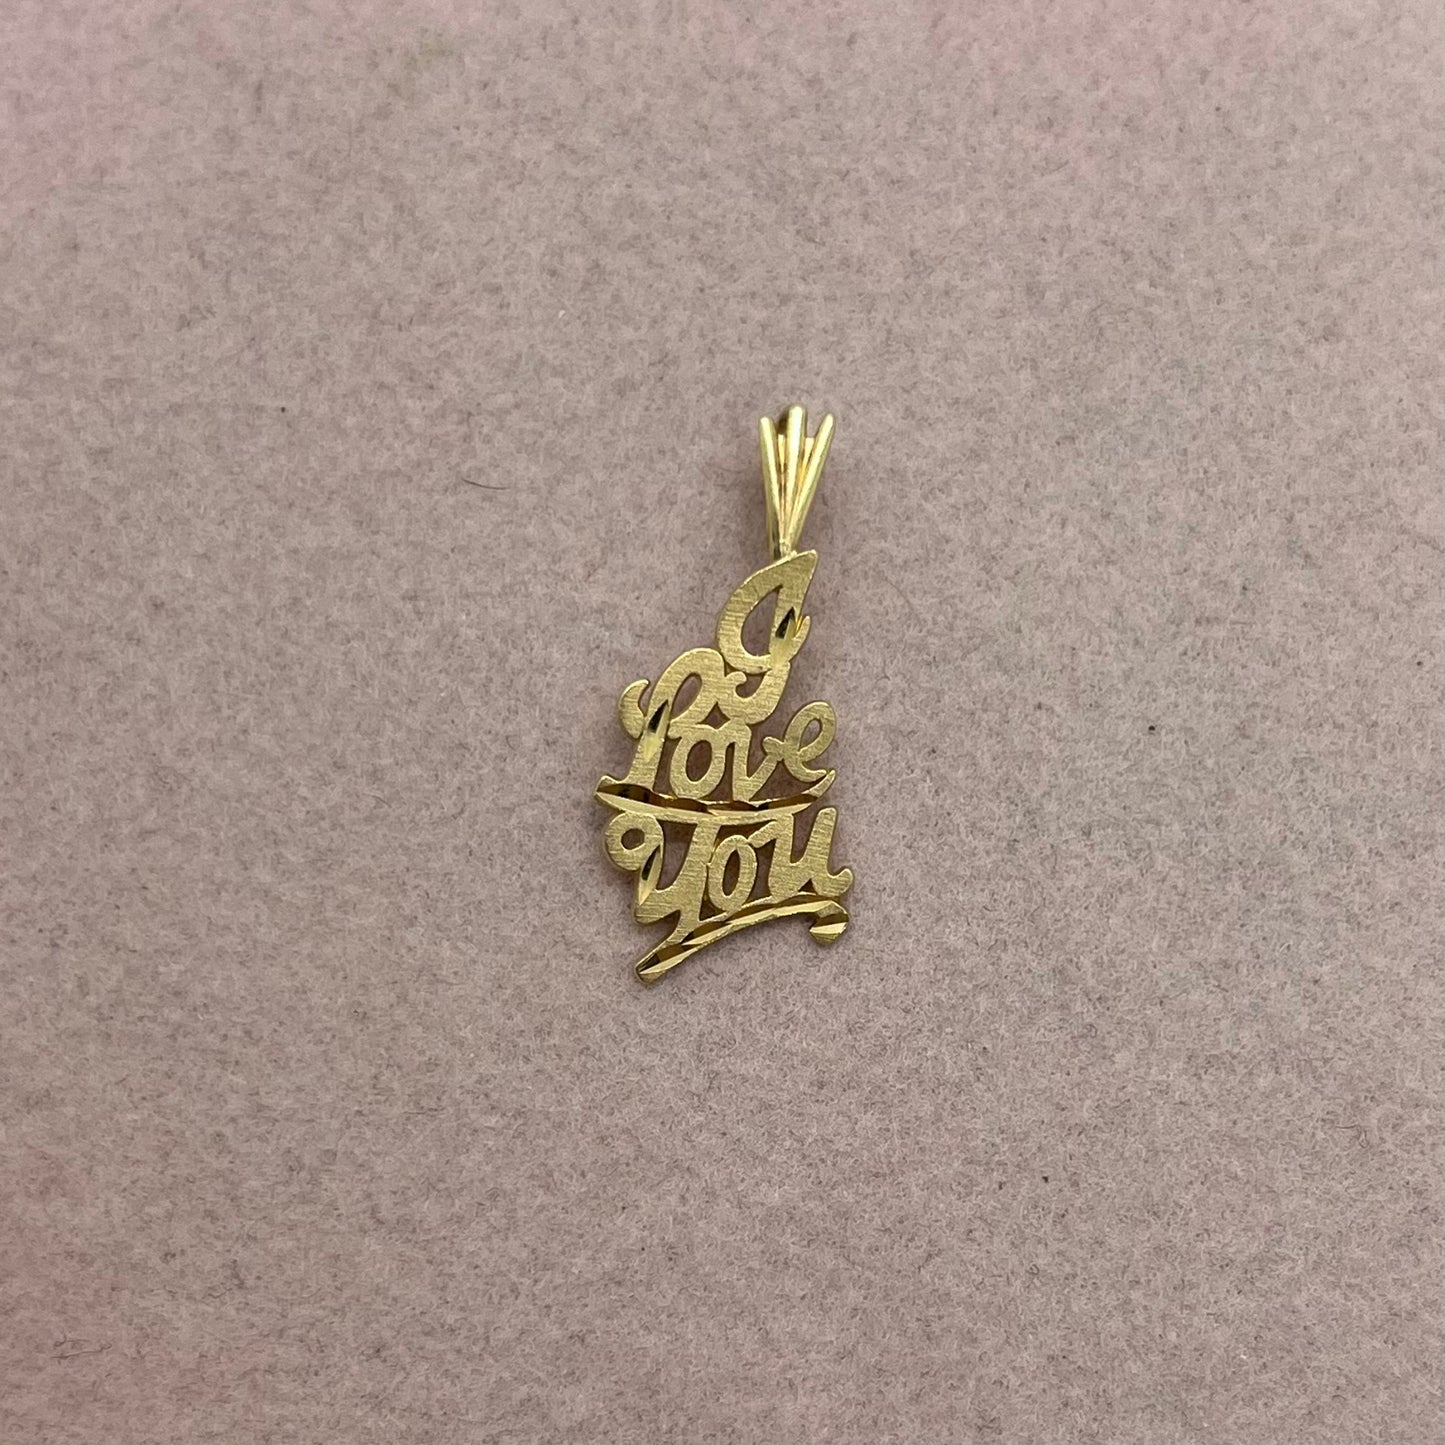 'I Love You' Pendant by Michael Anthony (1985)